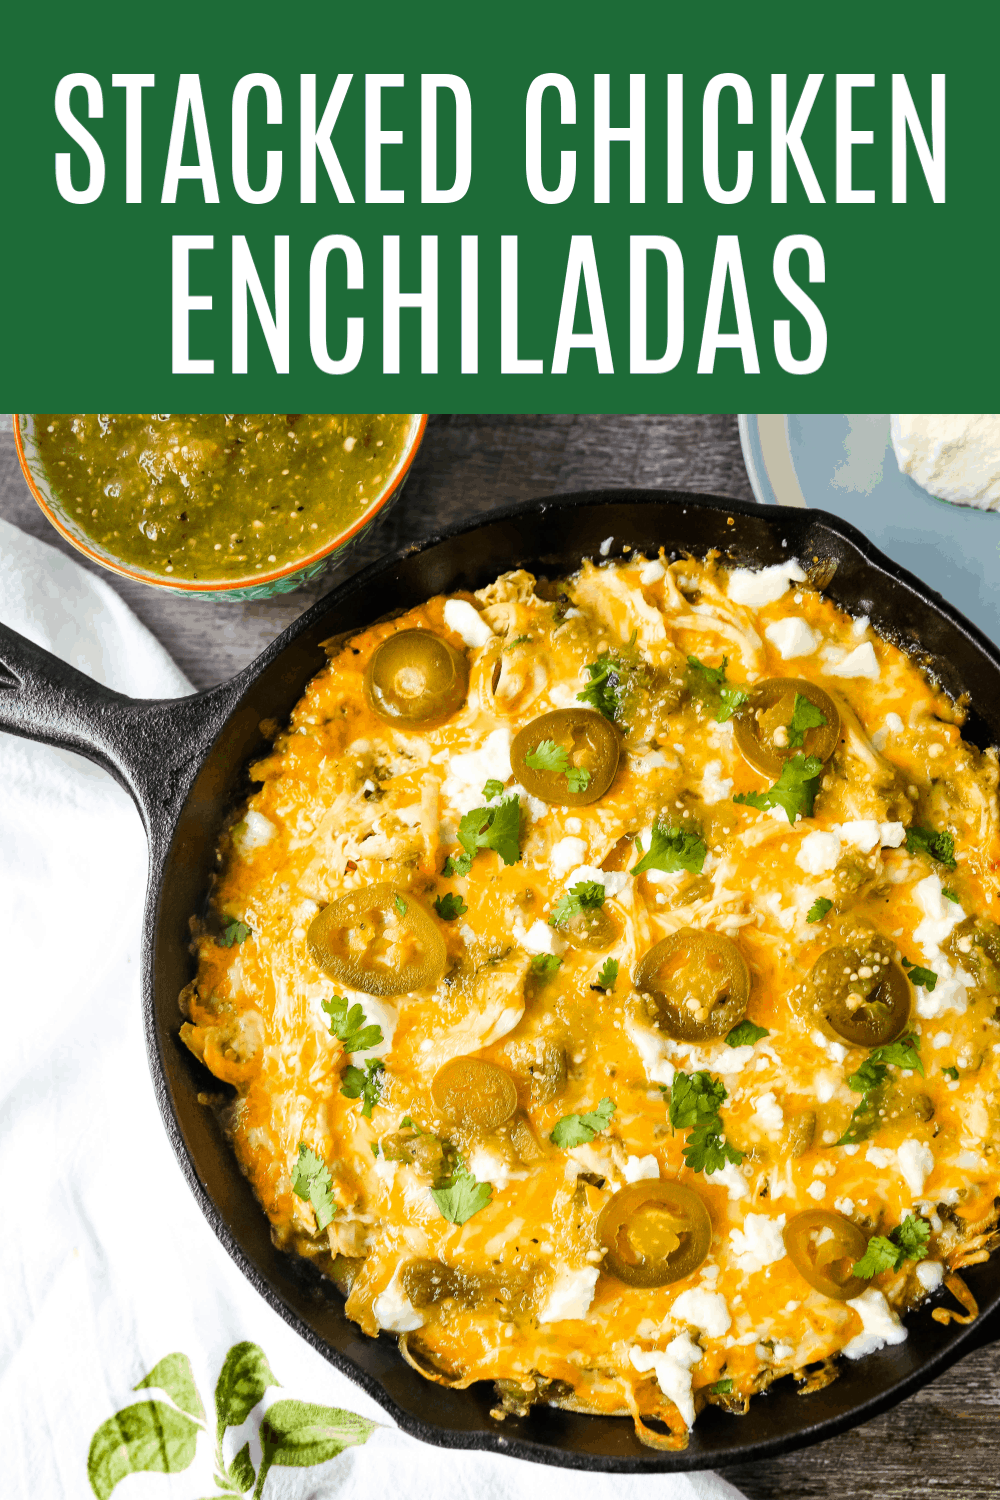 Chicken Stacked Enchiladas Quick and easy stacked chicken enchiladas with salsa verde and Mexican cheeses. Authentic Mexican chicken enchiladas that can be thrown together in a snap! The best stacked chicken enchiladas recipe. www.modernhoney.com #enchiladas #mexicanfood #chicken #chickenenchiladas